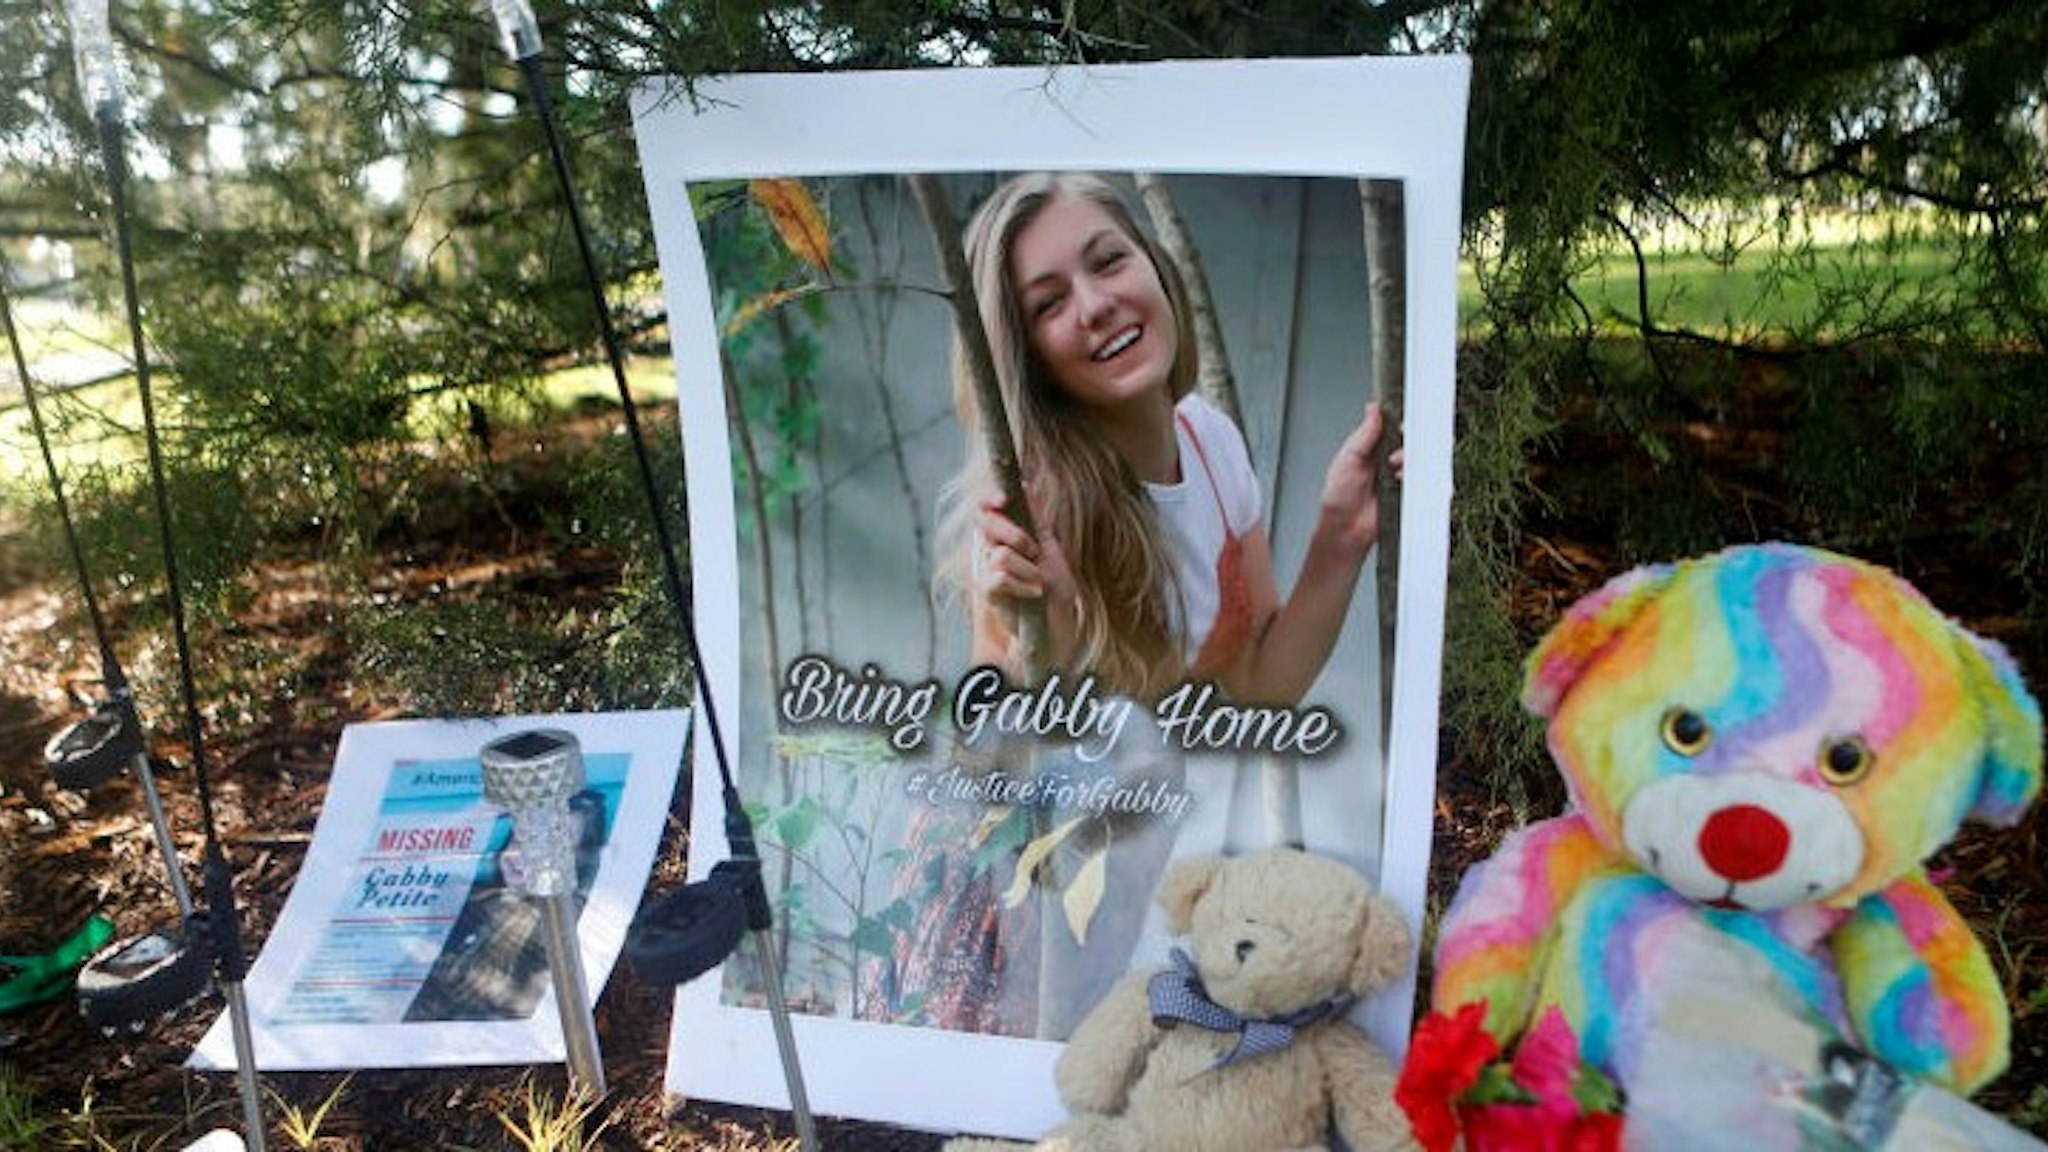 NORTH PORT, FL - SEPTEMBER 20: A makeshift memorial dedicated to missing woman Gabby Petito is located near City Hall on September 20, 2021 in North Port, Florida. A body has been found by authorities in Grand Teton National Park in Wyoming that fits the description of Petito, who went missing while on a cross-country trip with her boyfriend Brian Laundrie. (Photo by